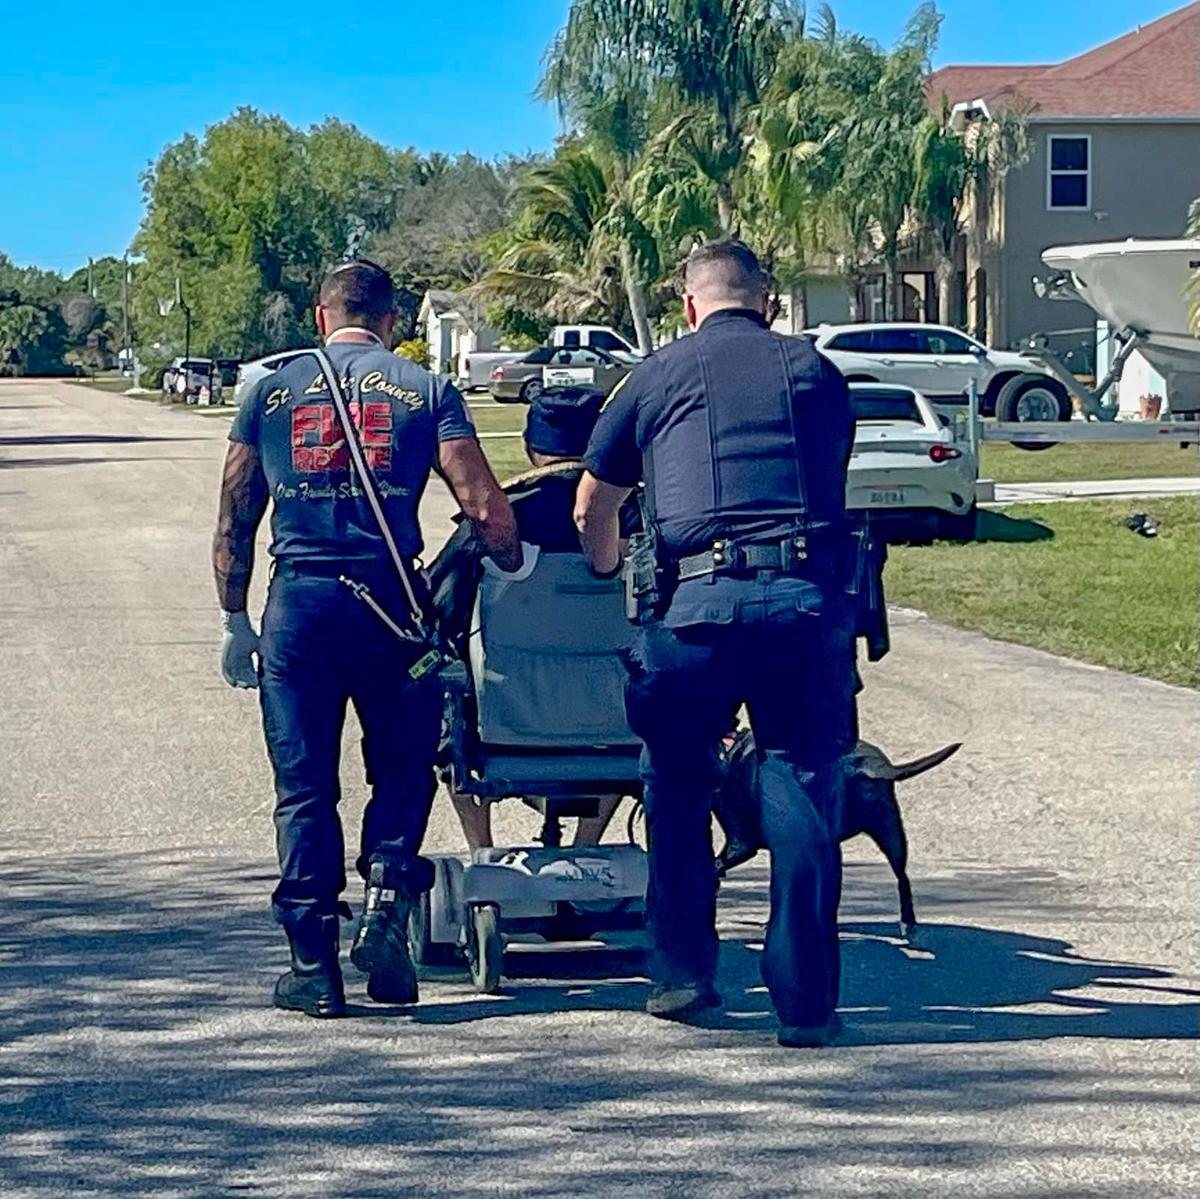 (Courtesy of <a href="https://www.cityofpsl.com/government/departments/police">Port St. Lucie Police Department</a>)